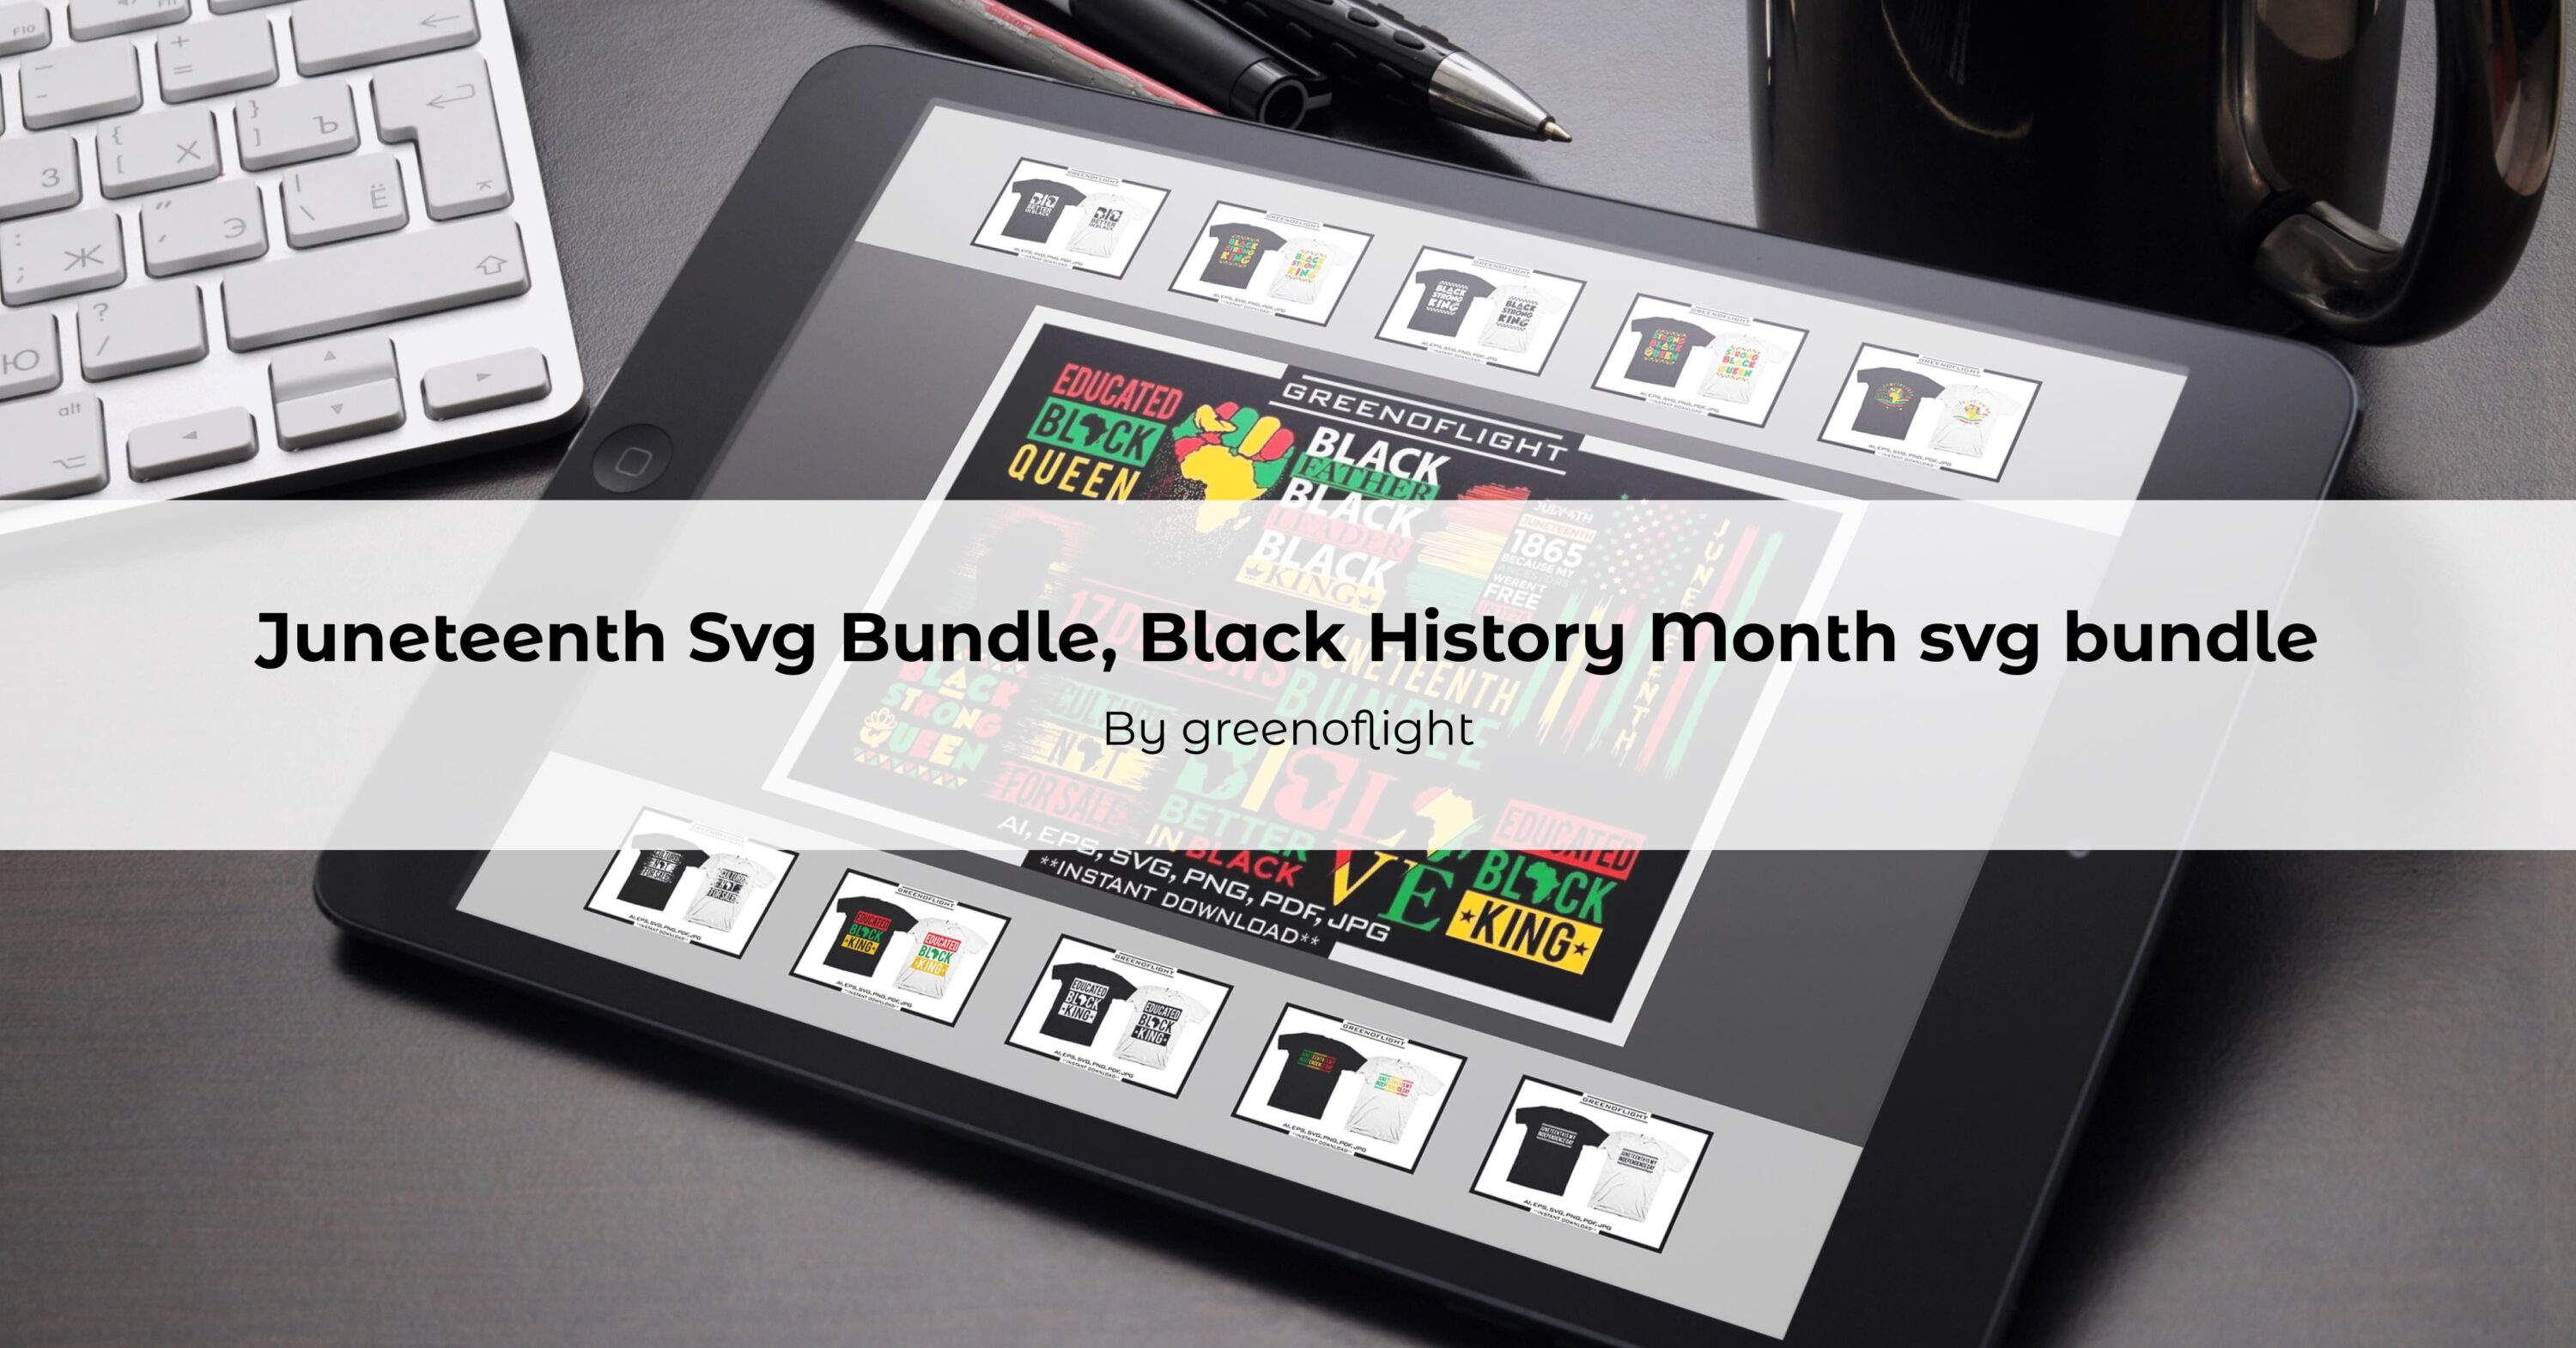 Juneteenth Svg Bundle for your creative projects.